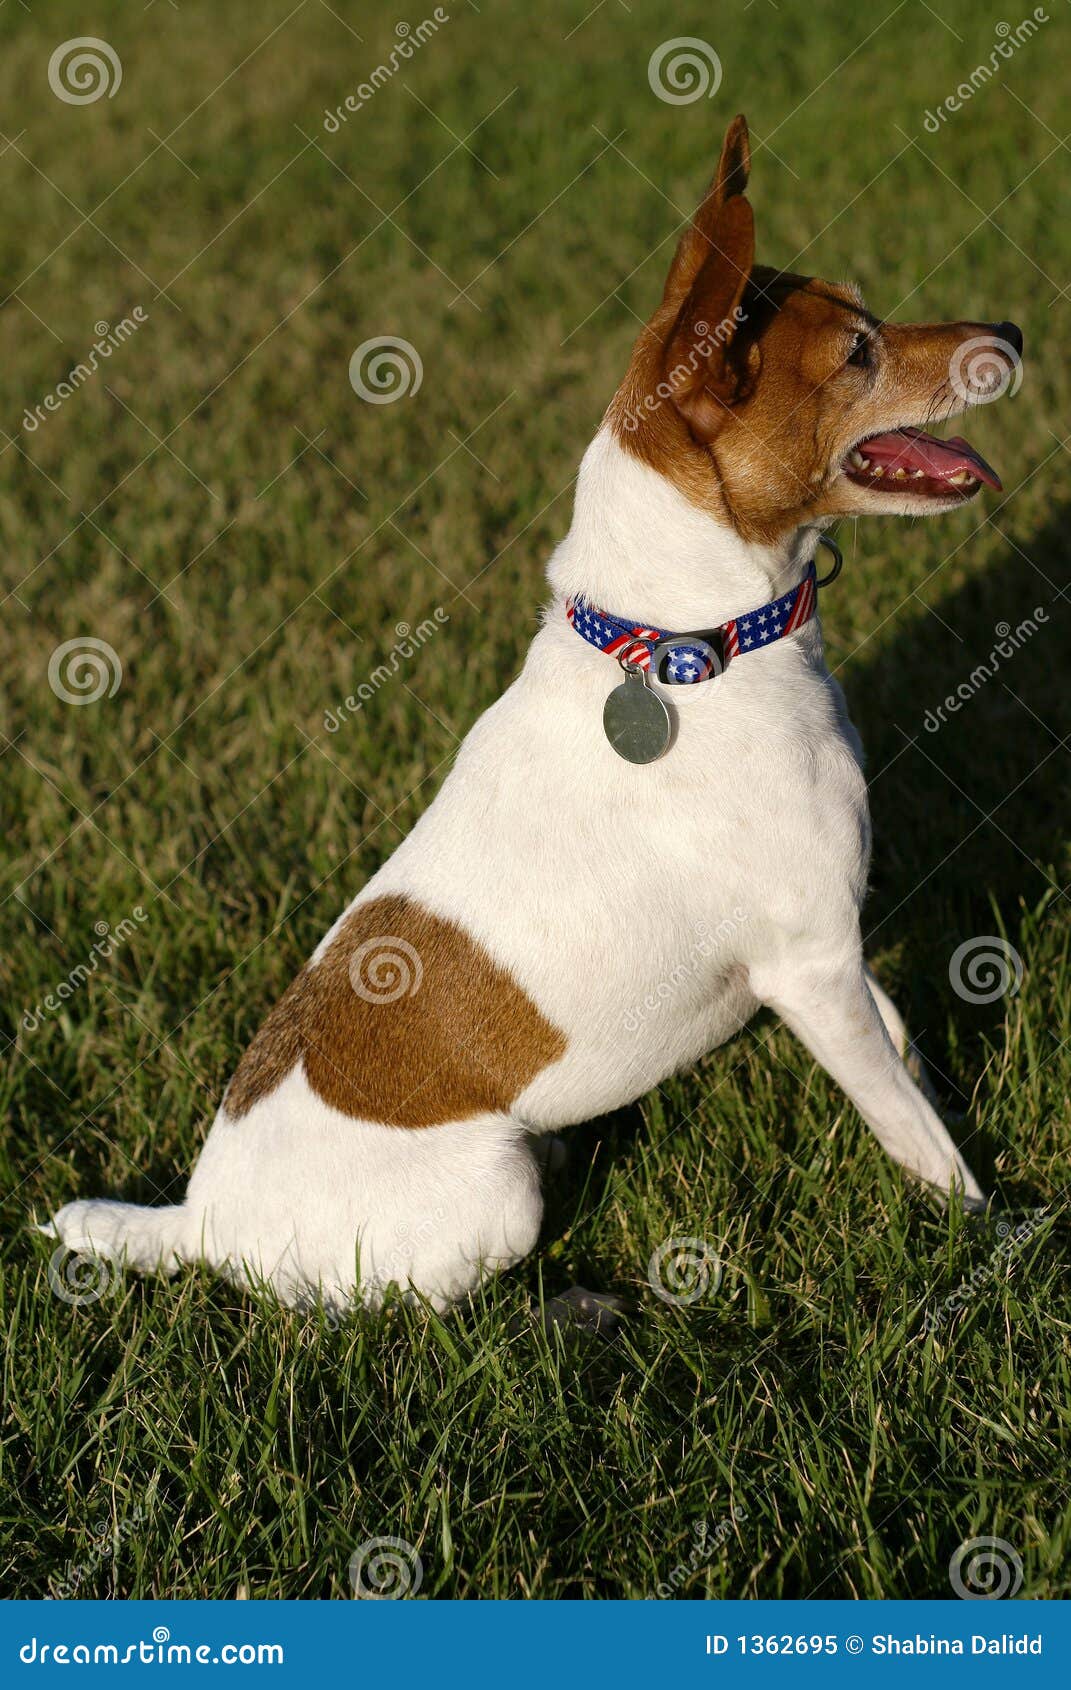 Toy Fox Terrier Sitting On Grass Royalty Free Stock Photo - Image: 1362695